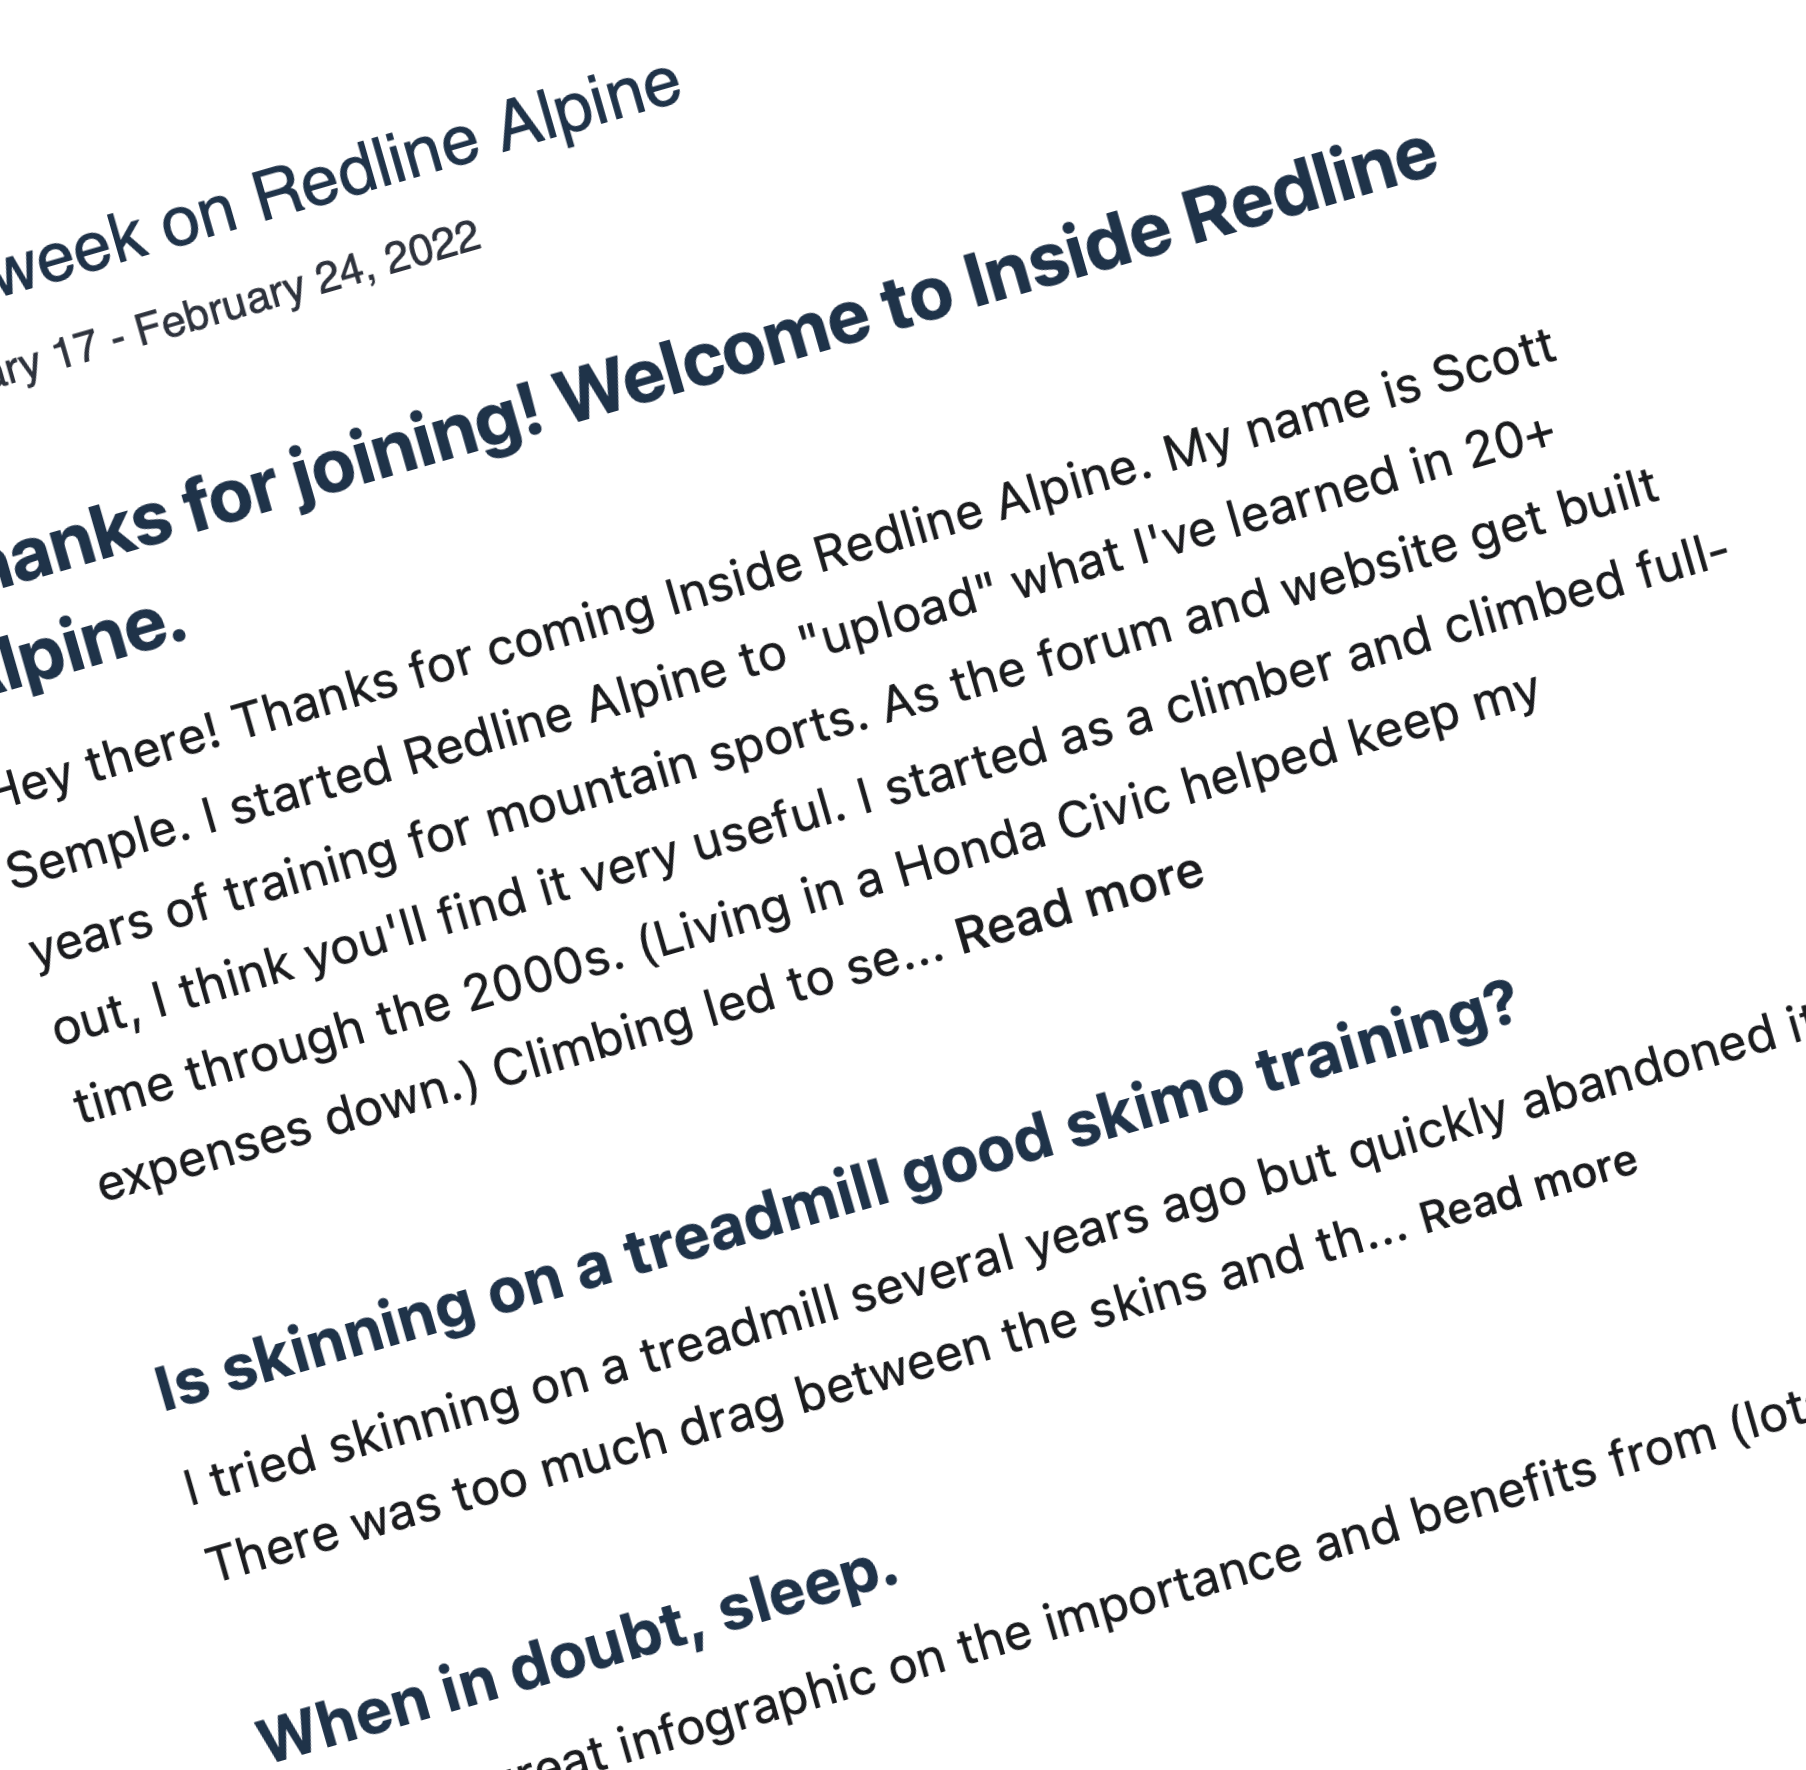 An image of a sample summary of new posts from Inside Redline Alpine